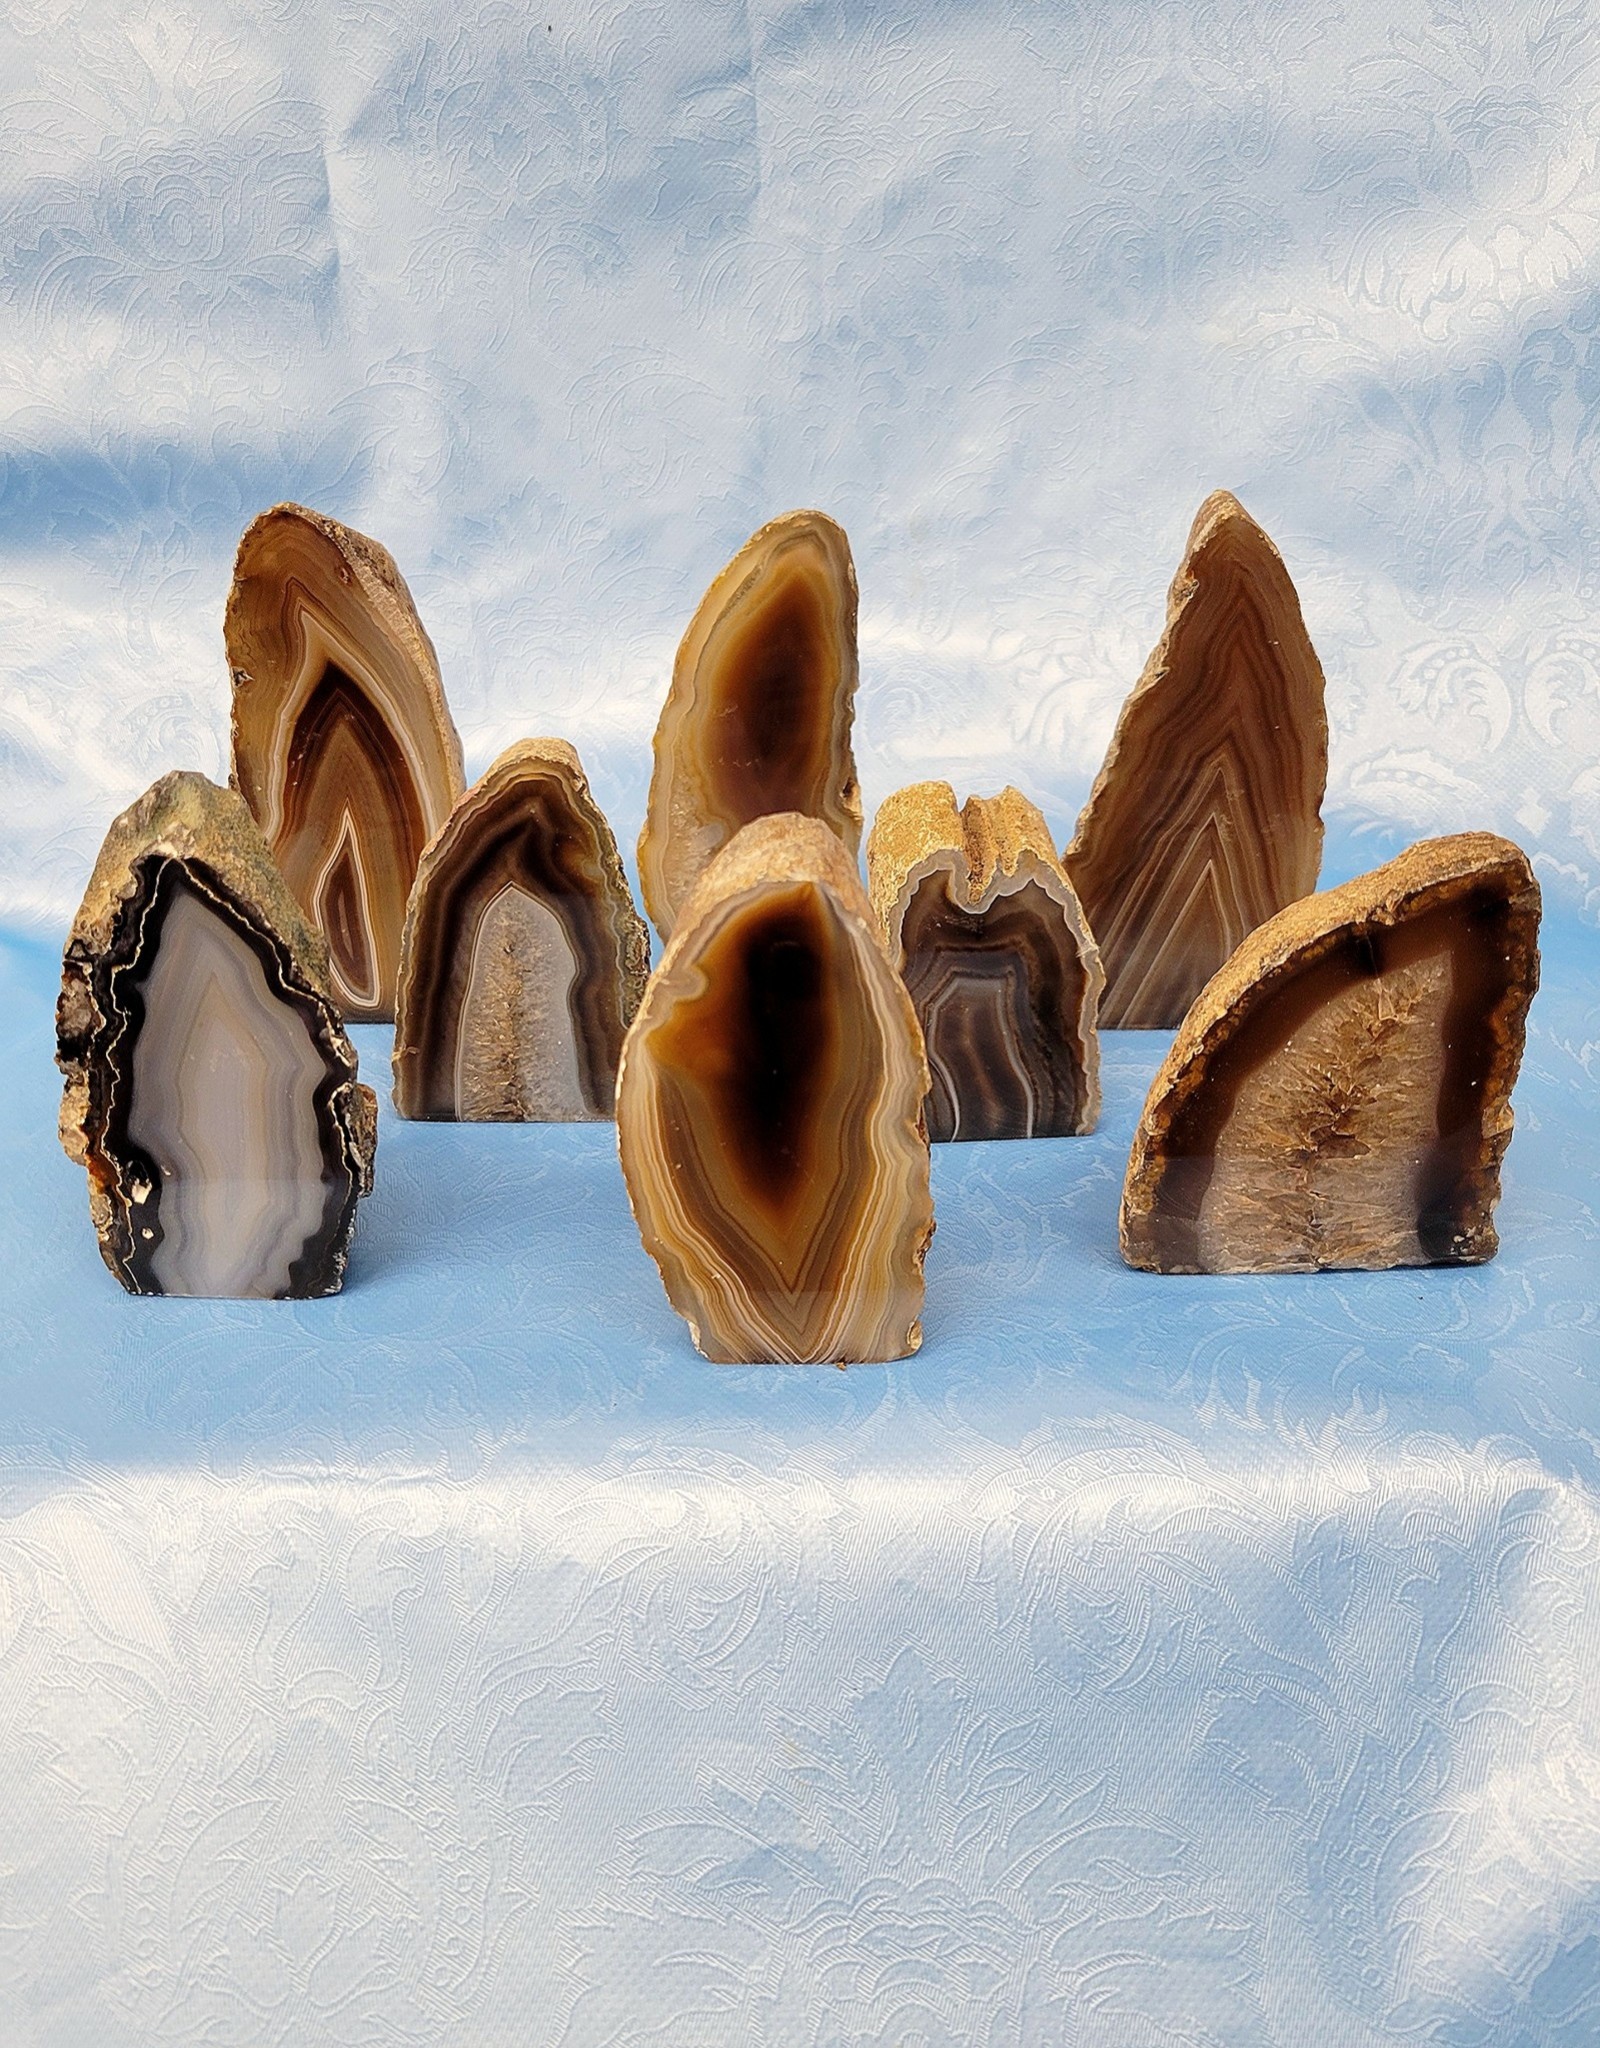 Agate Natural Slices Standing